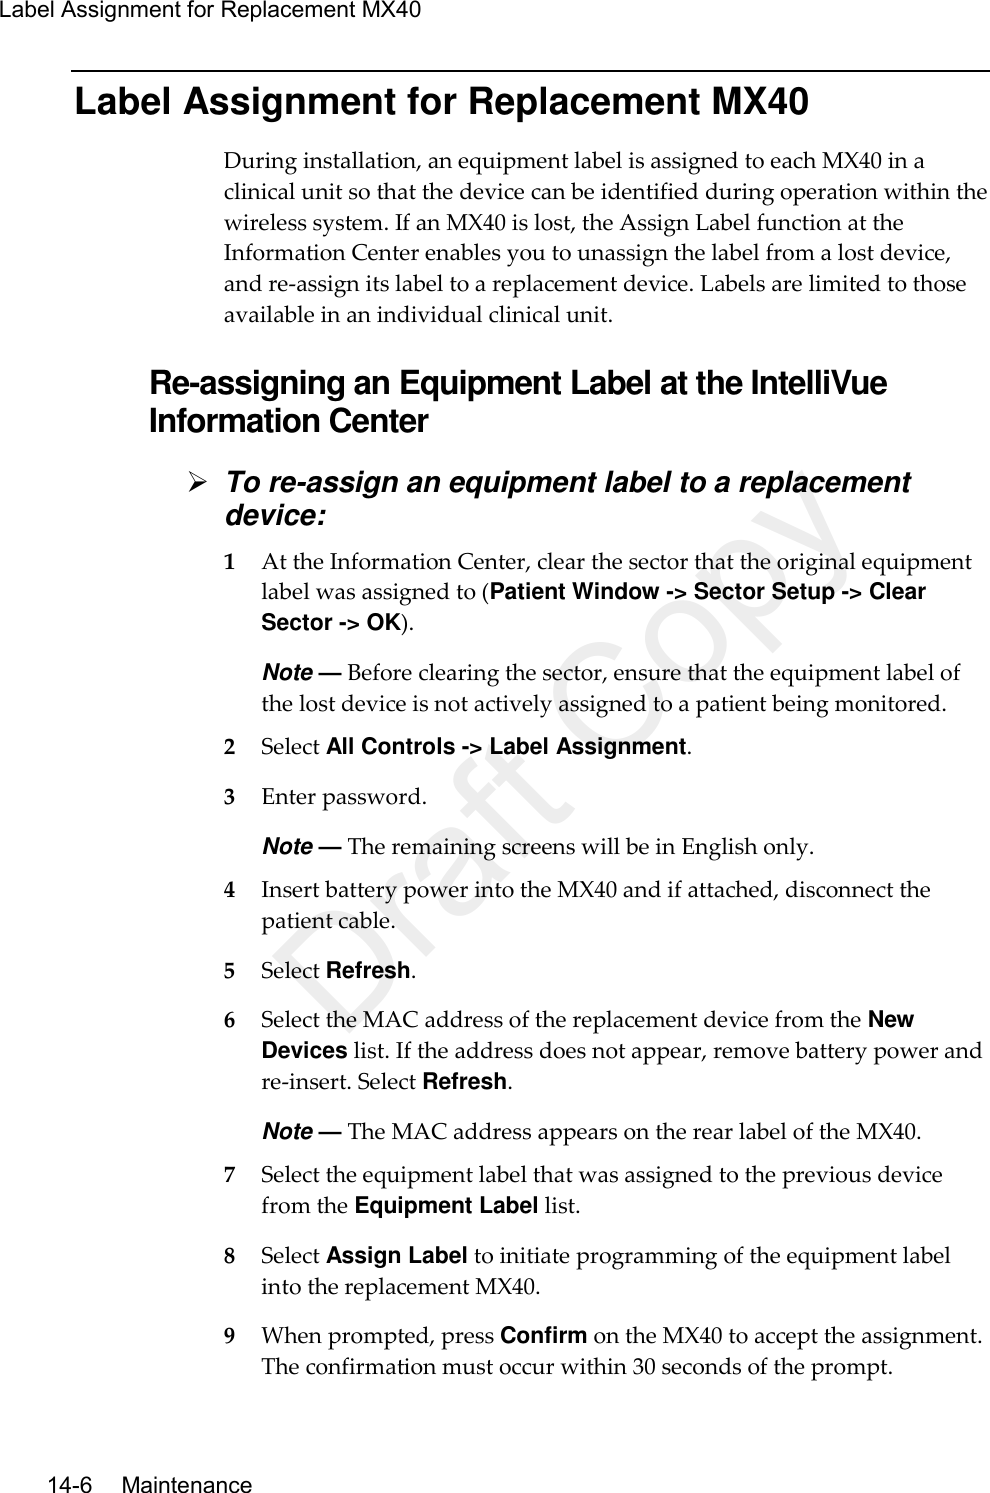 Label Assignment for Replacement MX40  14-6   Maintenance Label Assignment for Replacement MX40 During installation, an equipment label is assigned to each MX40 in a clinical unit so that the device can be identified during operation within the wireless system. If an MX40 is lost, the Assign Label function at the Information Center enables you to unassign the label from a lost device, and re-assign its label to a replacement device. Labels are limited to those available in an individual clinical unit.  Re-assigning an Equipment Label at the IntelliVue Information Center  To re-assign an equipment label to a replacement device: 1 At the Information Center, clear the sector that the original equipment label was assigned to (Patient Window -&gt; Sector Setup -&gt; Clear Sector -&gt; OK). Note — Before clearing the sector, ensure that the equipment label of the lost device is not actively assigned to a patient being monitored. 2 Select All Controls -&gt; Label Assignment. 3 Enter password. Note — The remaining screens will be in English only. 4 Insert battery power into the MX40 and if attached, disconnect the patient cable. 5 Select Refresh. 6 Select the MAC address of the replacement device from the New Devices list. If the address does not appear, remove battery power and re-insert. Select Refresh. Note — The MAC address appears on the rear label of the MX40. 7 Select the equipment label that was assigned to the previous device from the Equipment Label list. 8 Select Assign Label to initiate programming of the equipment label into the replacement MX40. 9 When prompted, press Confirm on the MX40 to accept the assignment. The confirmation must occur within 30 seconds of the prompt. Draft Copy